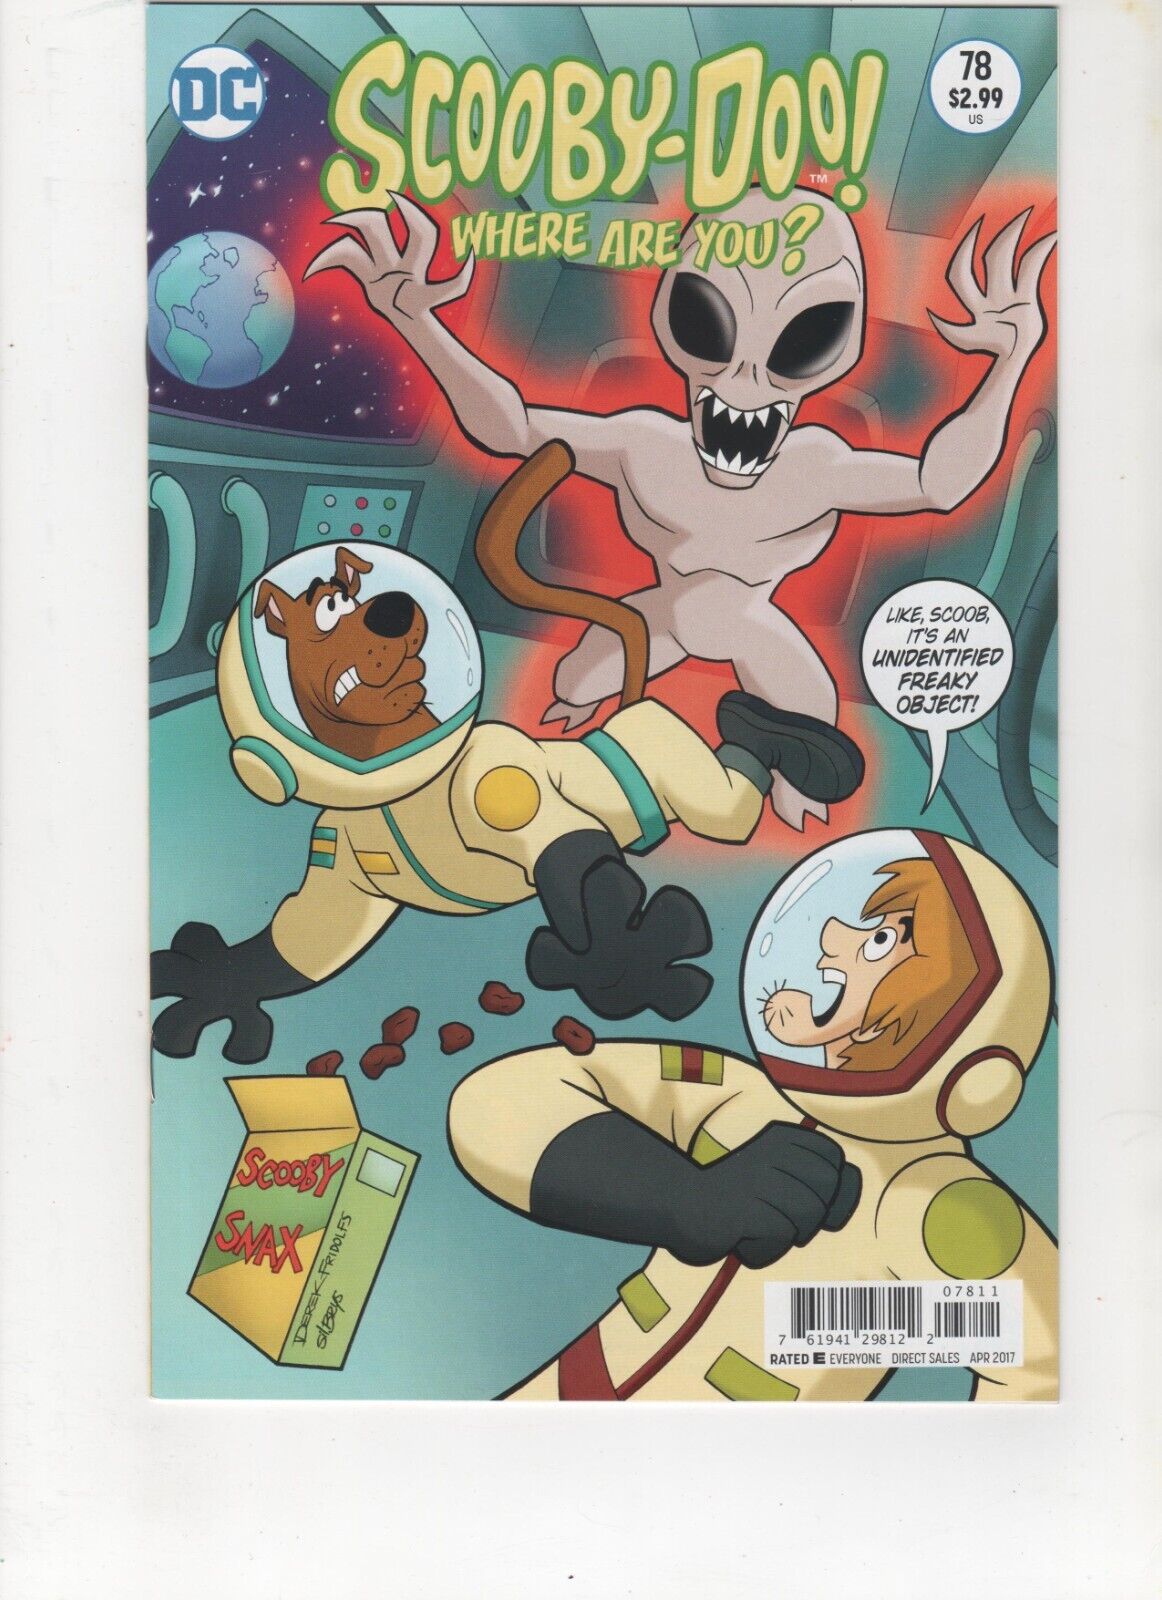 Scooby-Doo Where Are You? #78, NM 9.4, 1st Print, 2017, See Scans